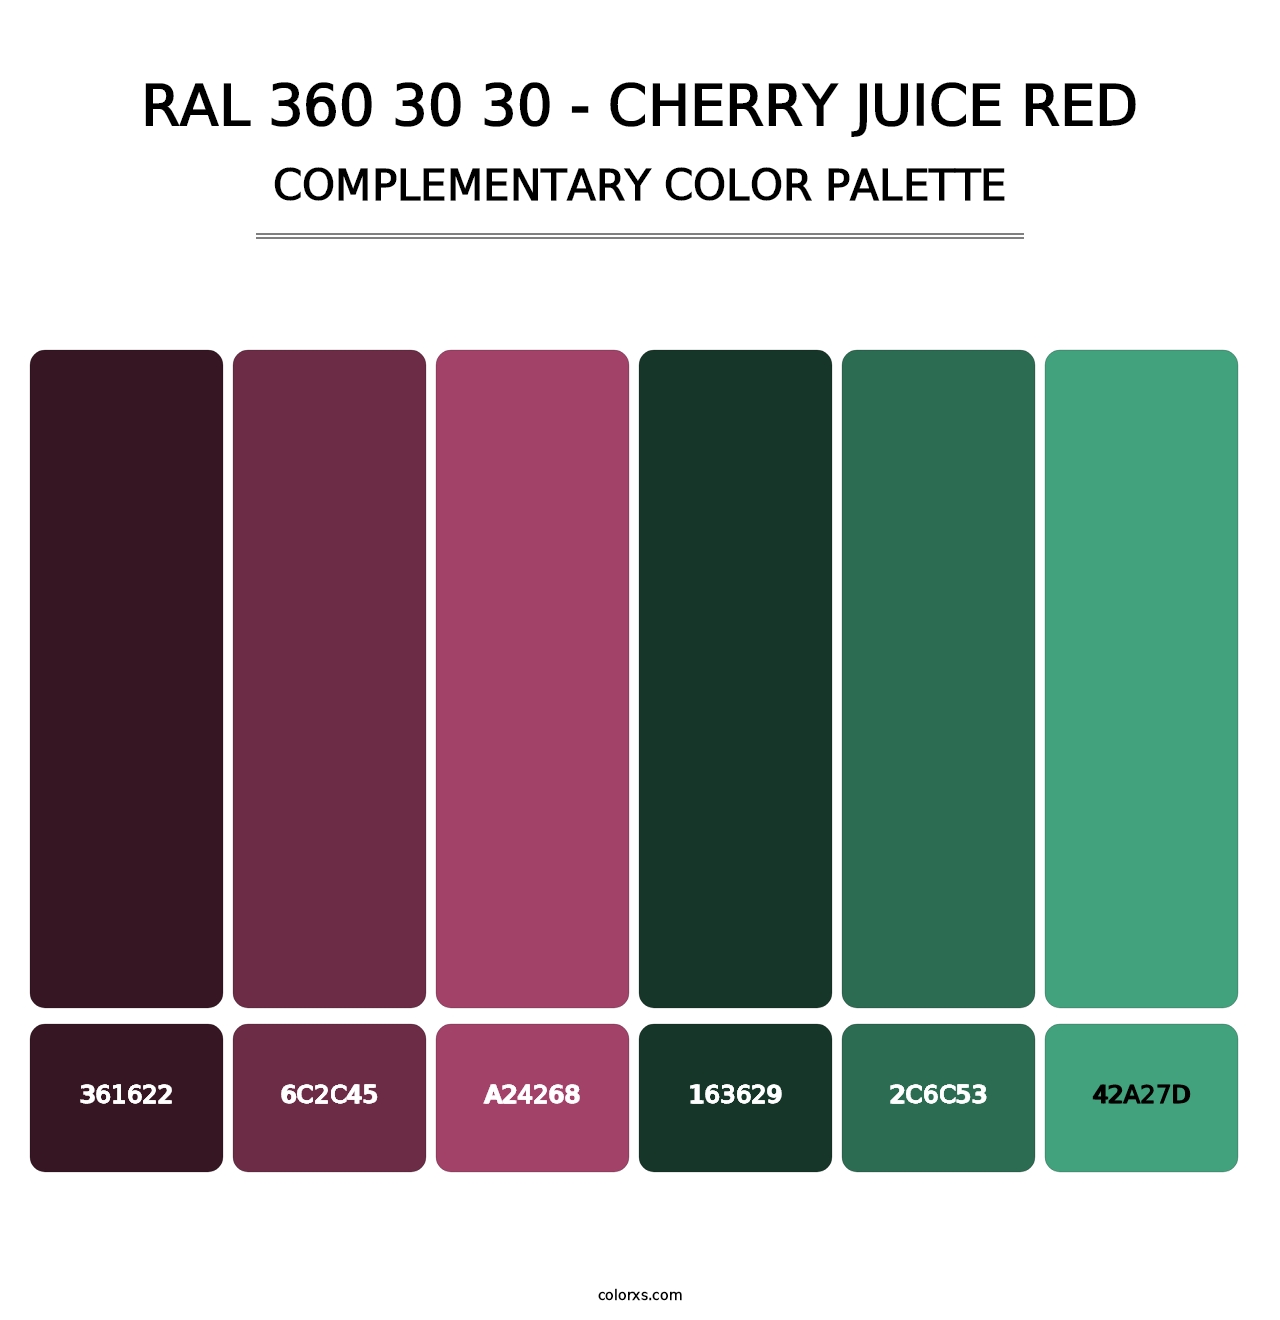 RAL 360 30 30 - Cherry Juice Red - Complementary Color Palette